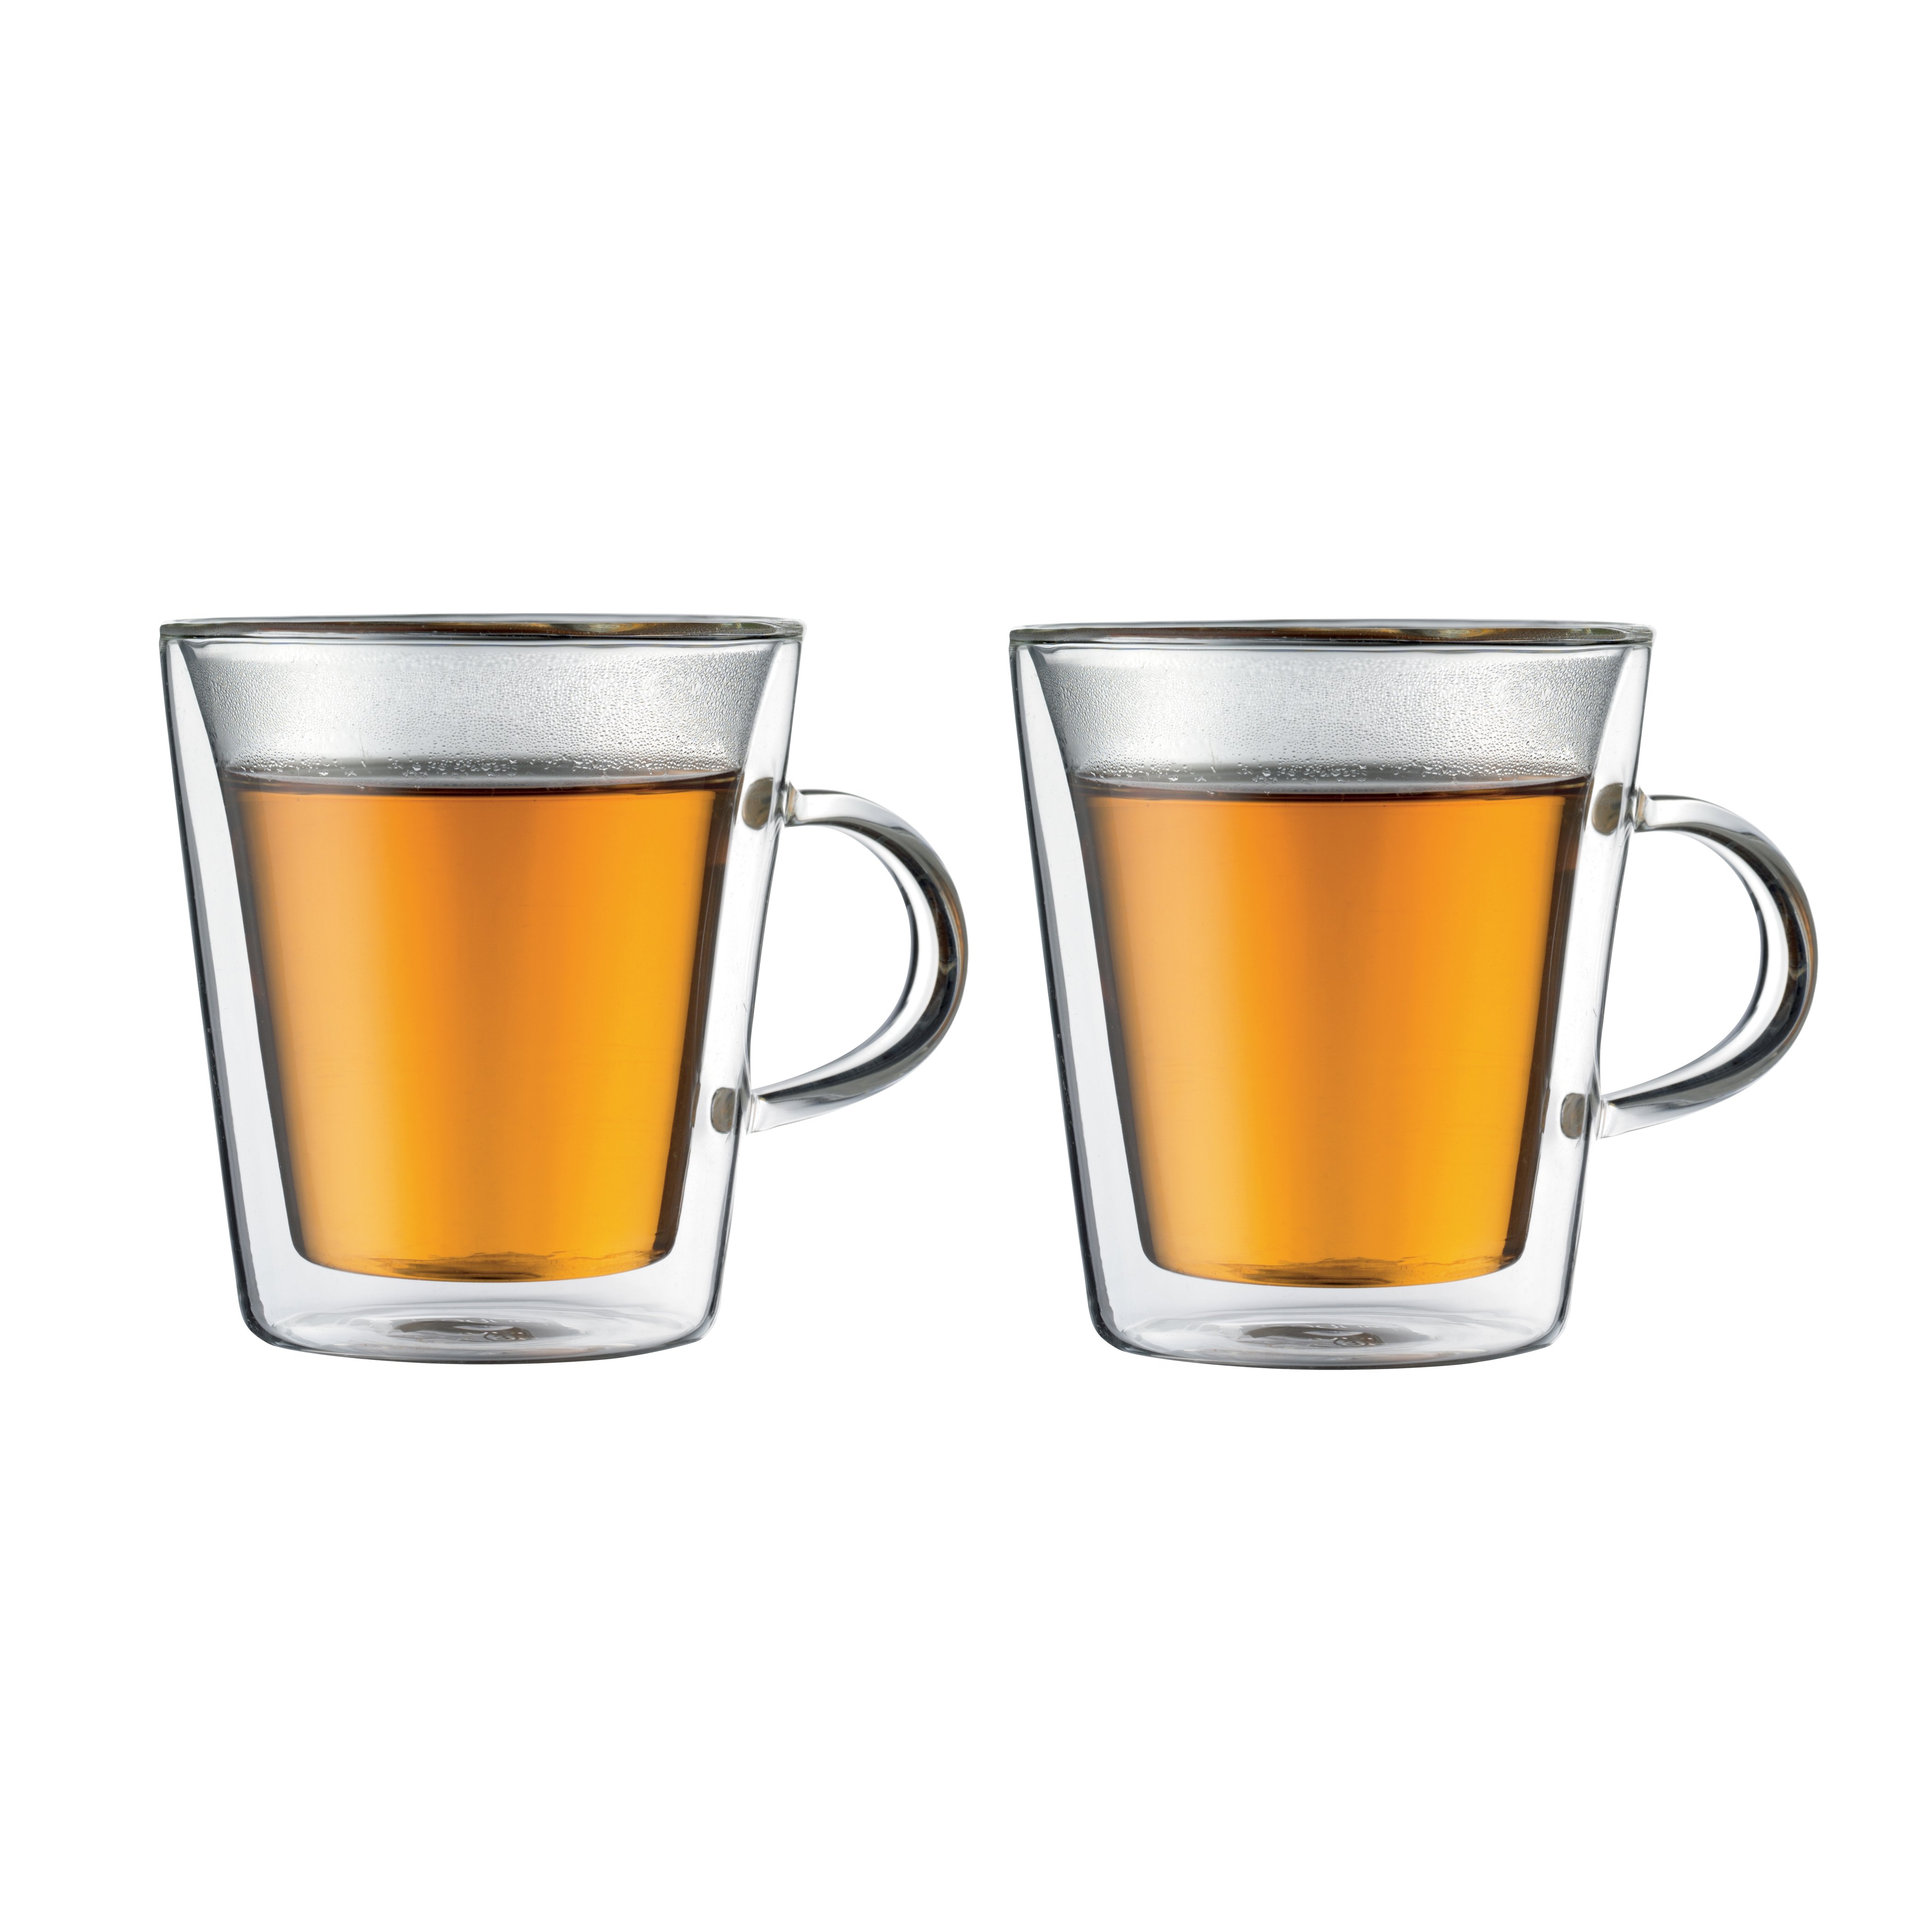 Canteen double wall glass with handle 2-pack from Bodum